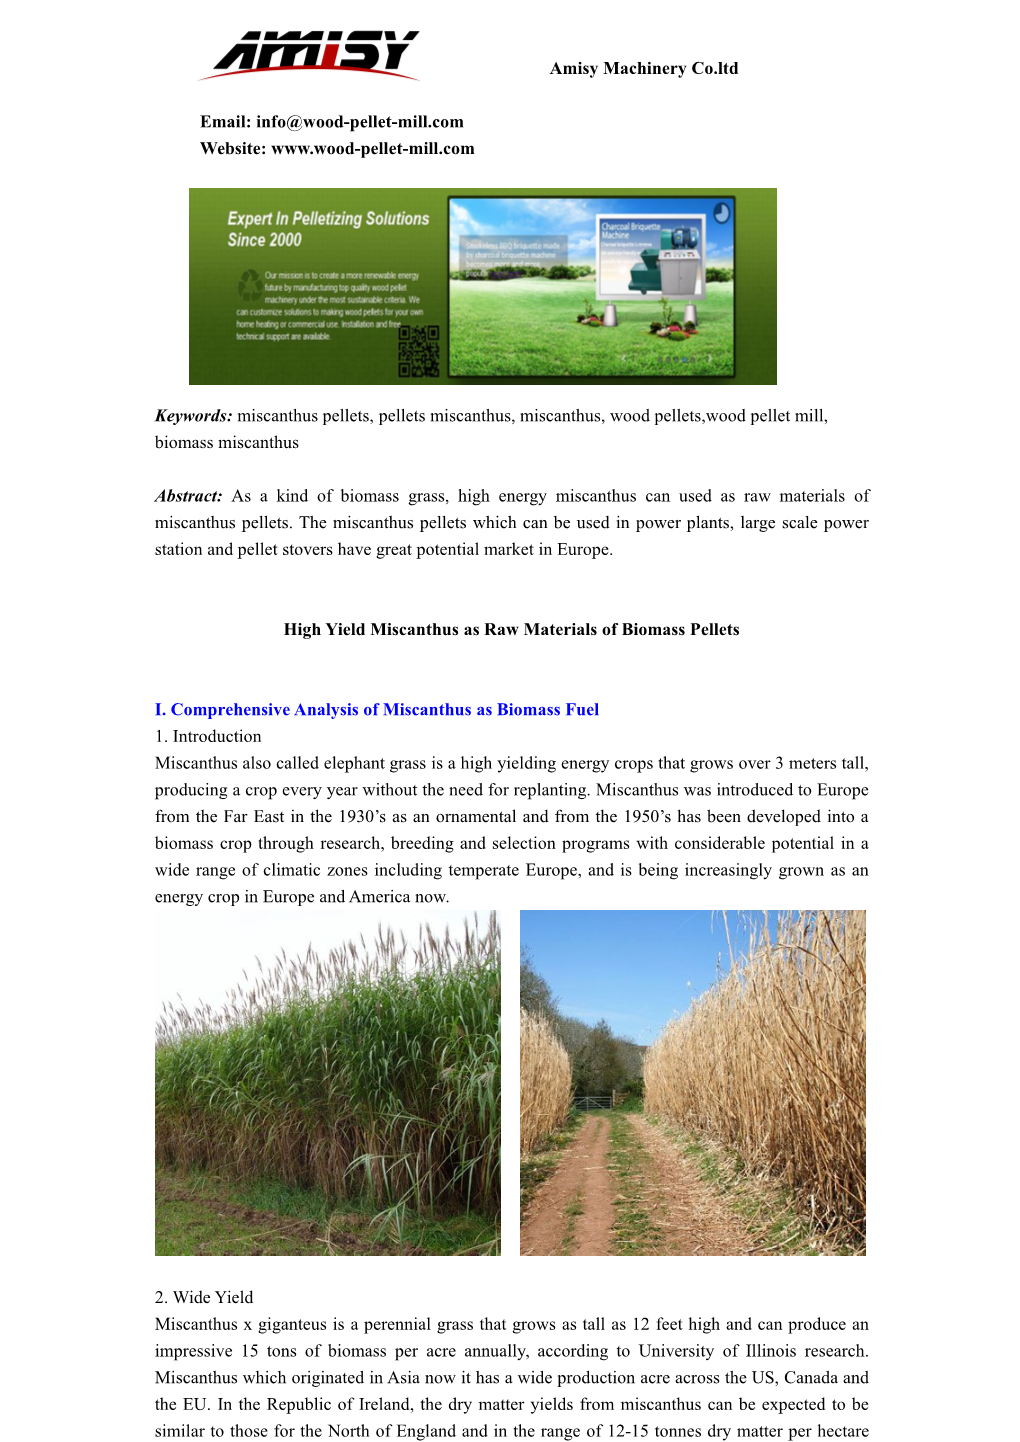 High Yield Miscanthus As Raw Materials of Wood